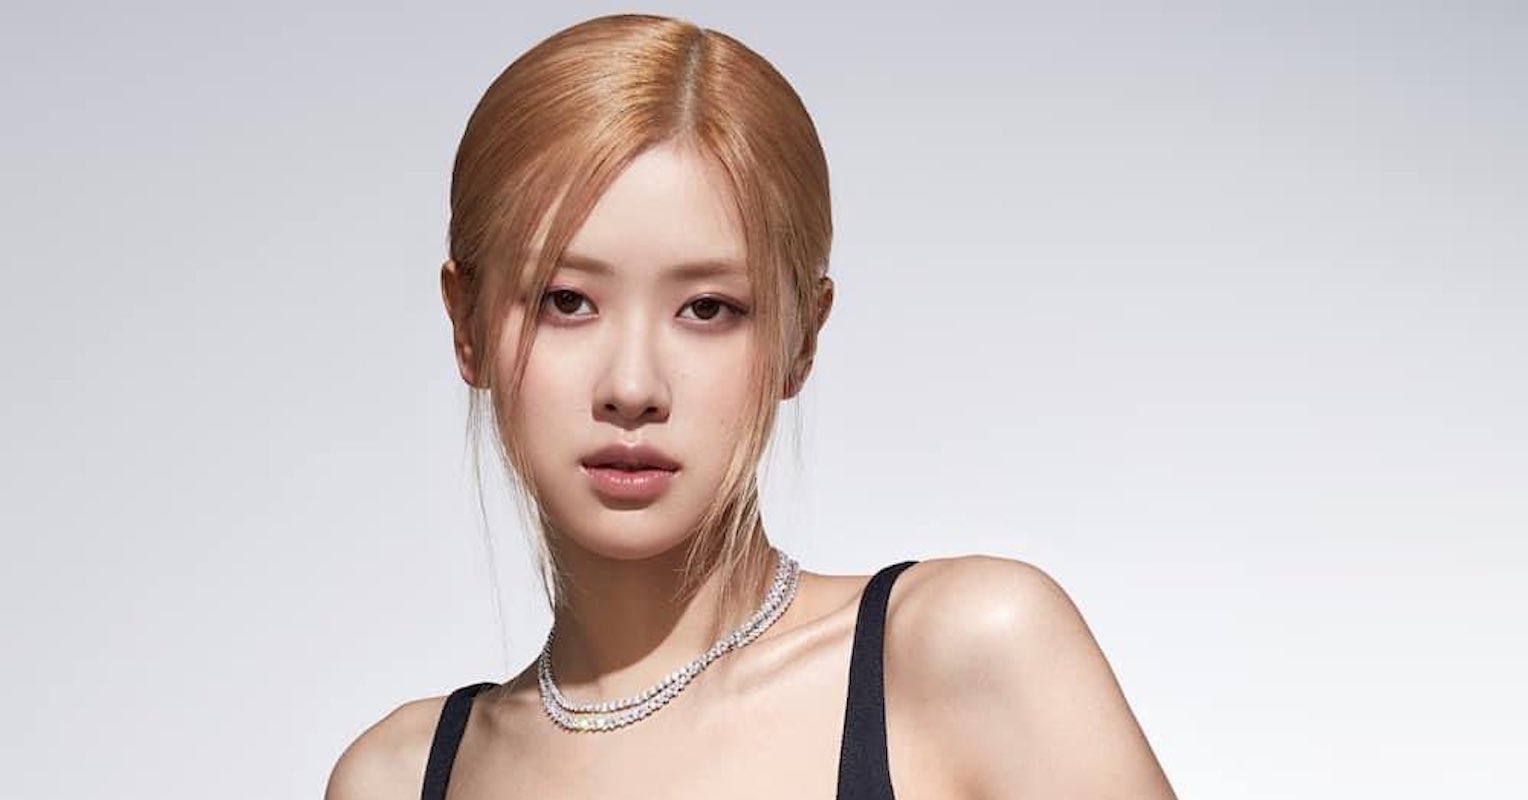 Blackpink's Rosé Fronts Tiffany & Co.'s New 'Lock' Campaign